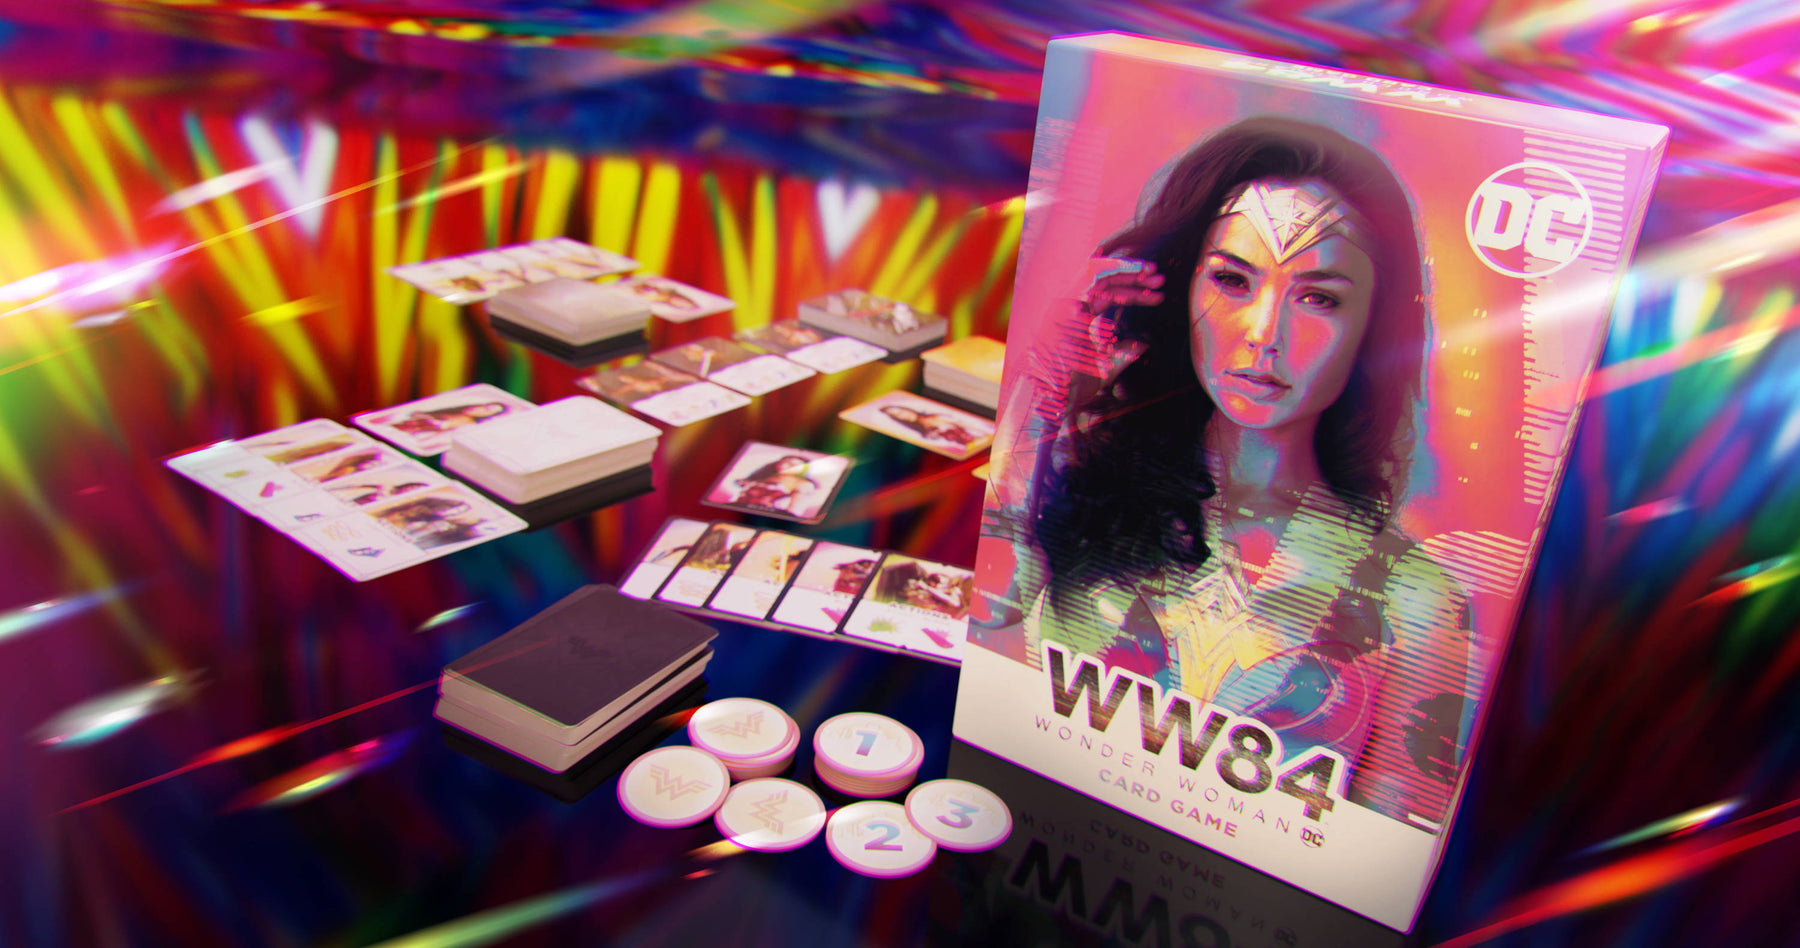 Cryptozoic Announces Release of Wonder Woman 1984 Card Game